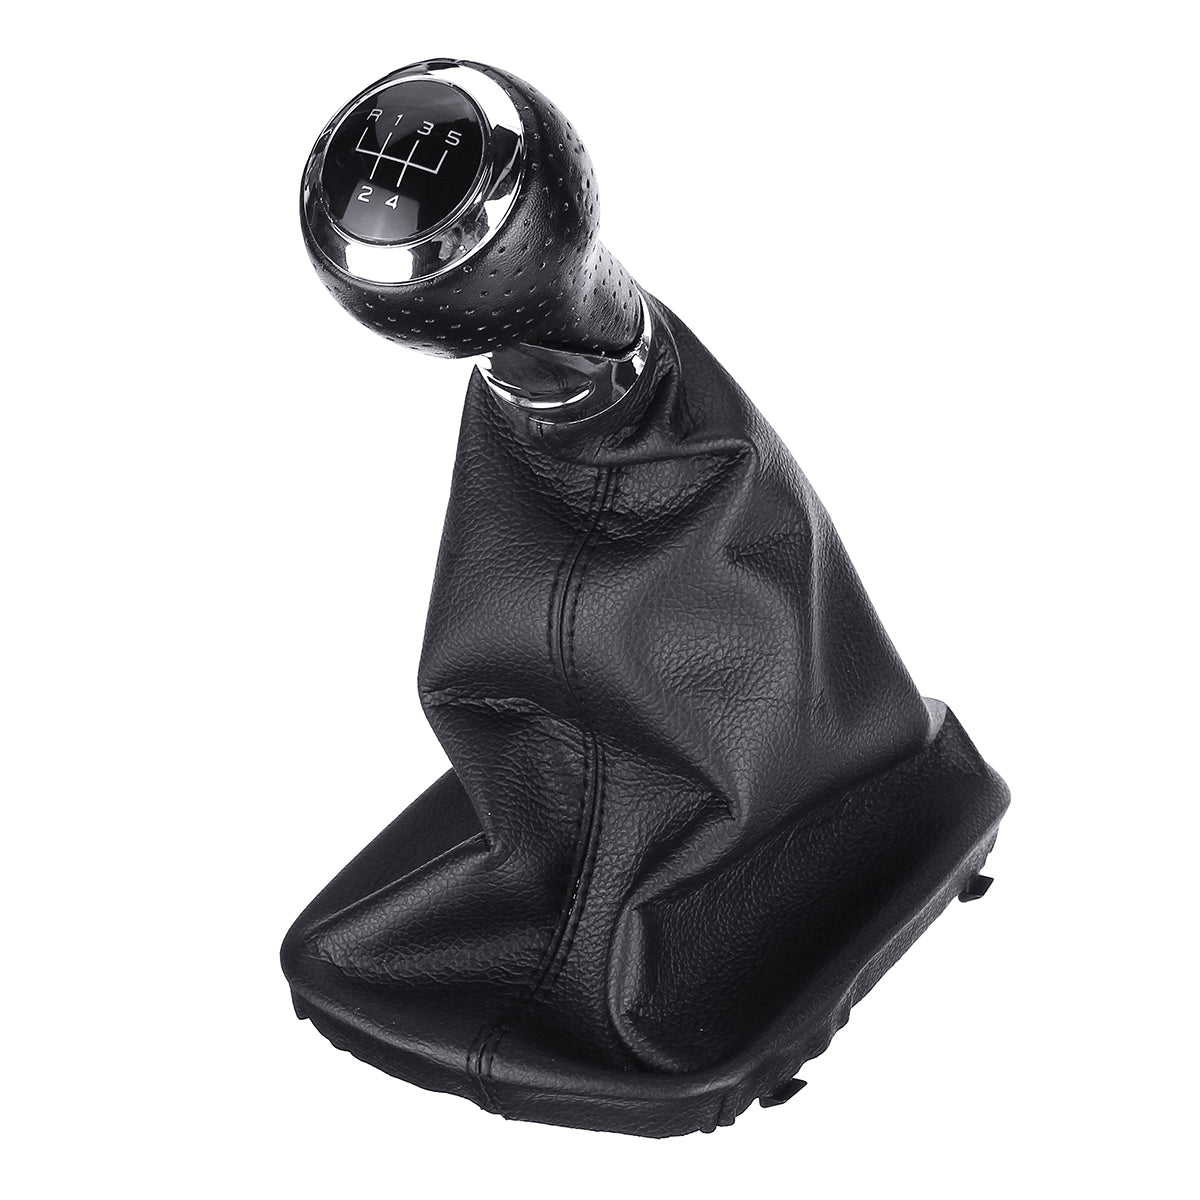 Dark Slate Gray 5 Speed Gear Shift Knob with Leather Boot Cover For AUDI A3 A4 Q5 S3 S4